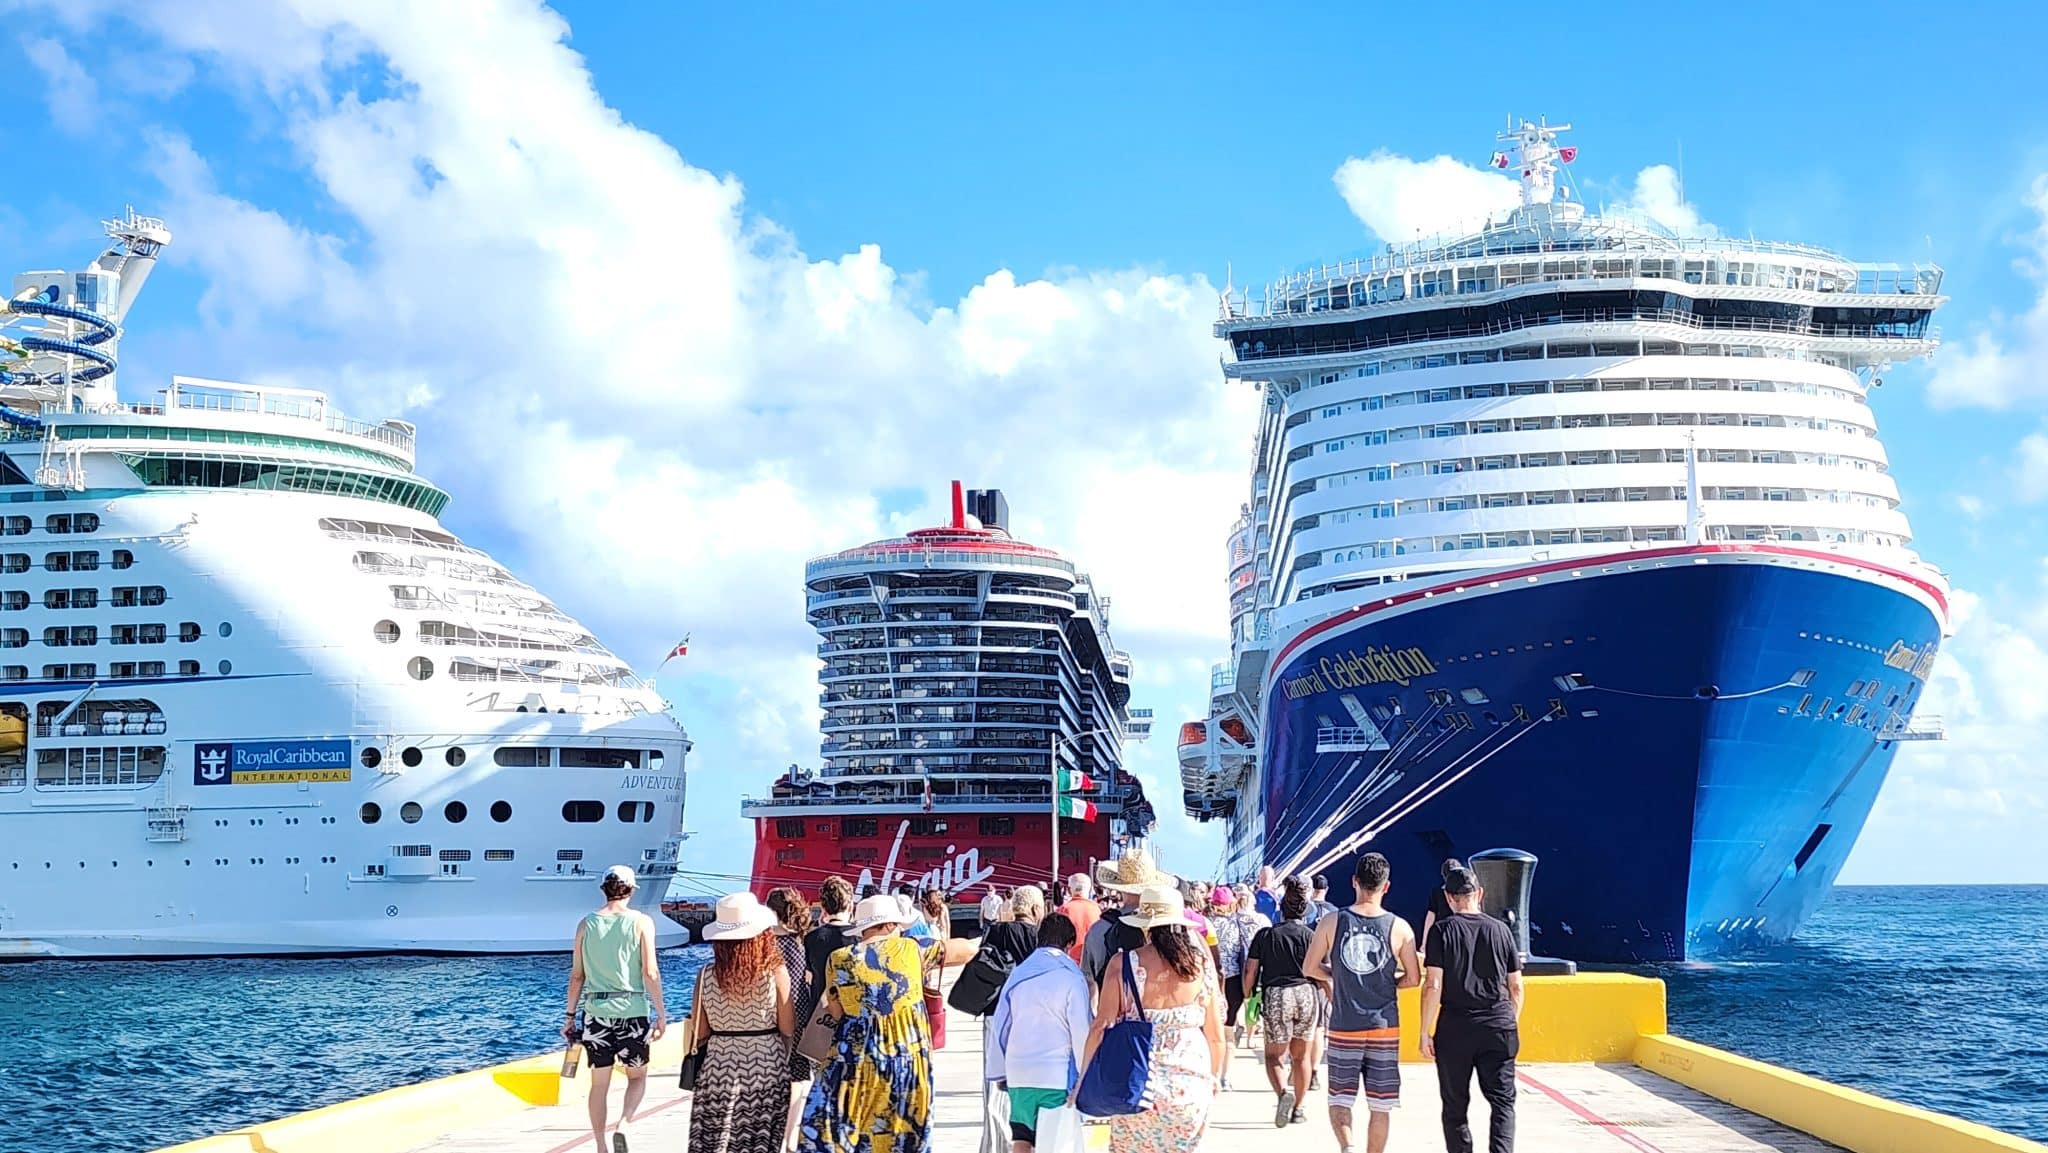 Cruise ships from Royal Caribbean, Virgin, and Carnival Cruise Line in port in Mexico